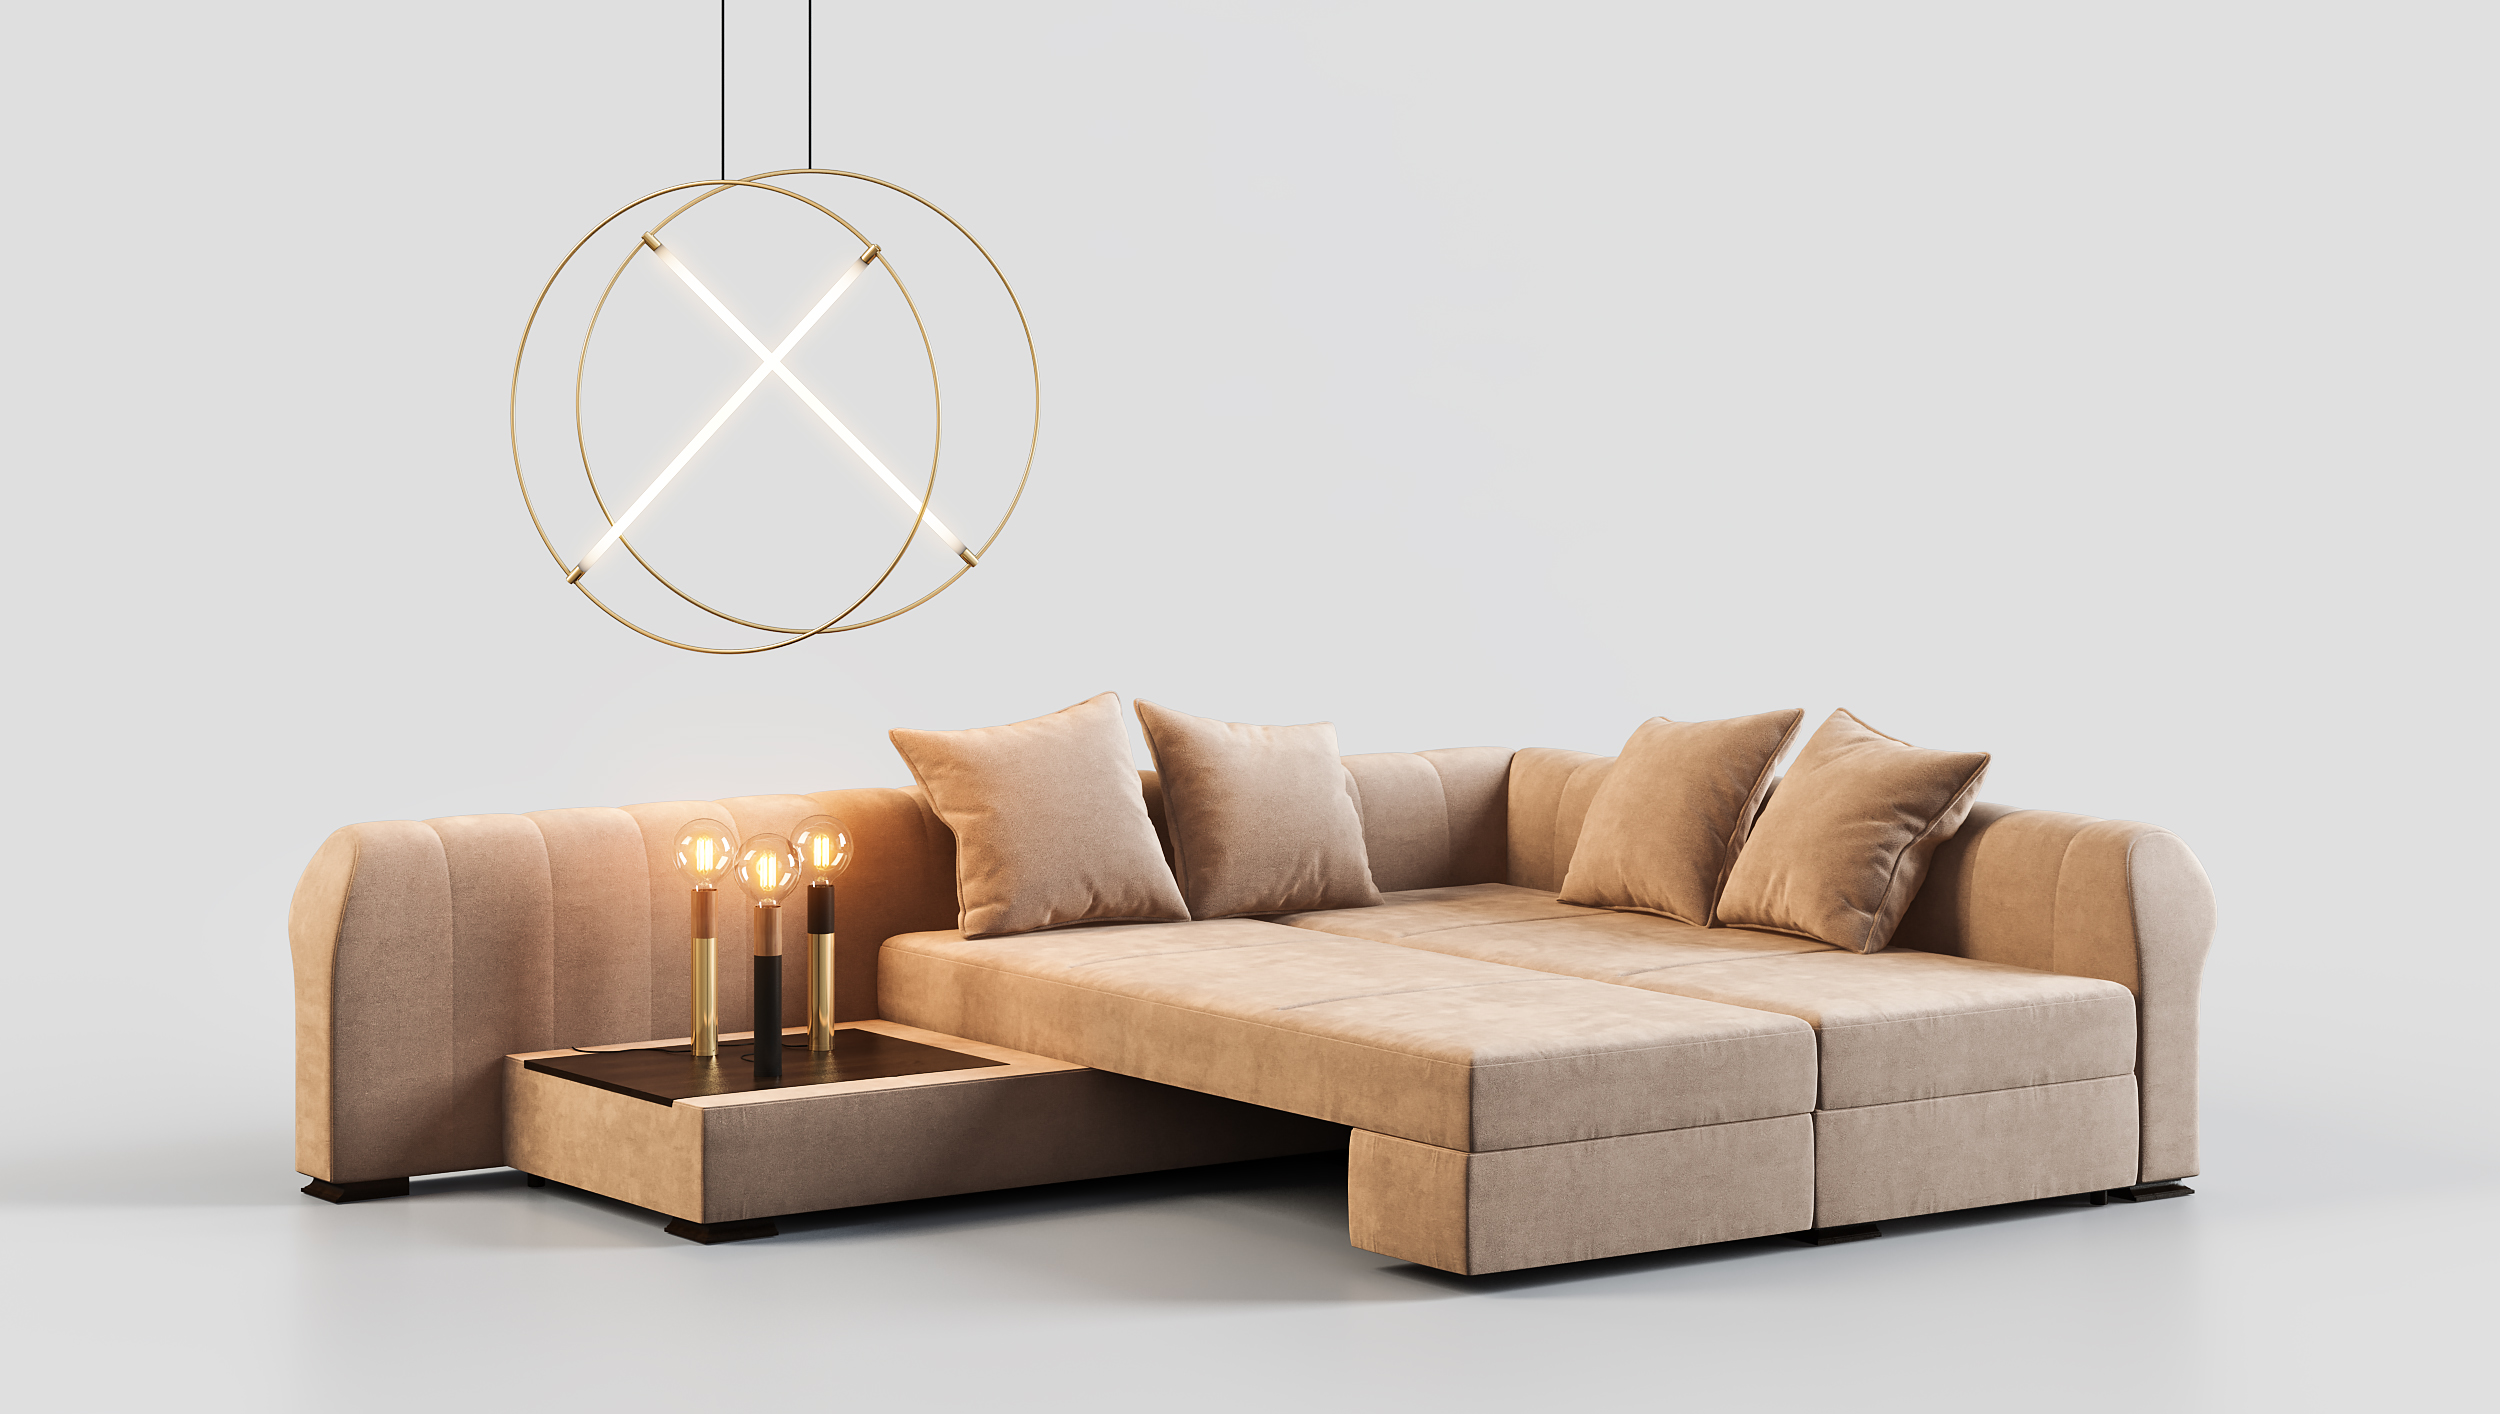 Commercial image 3D rendering sofa